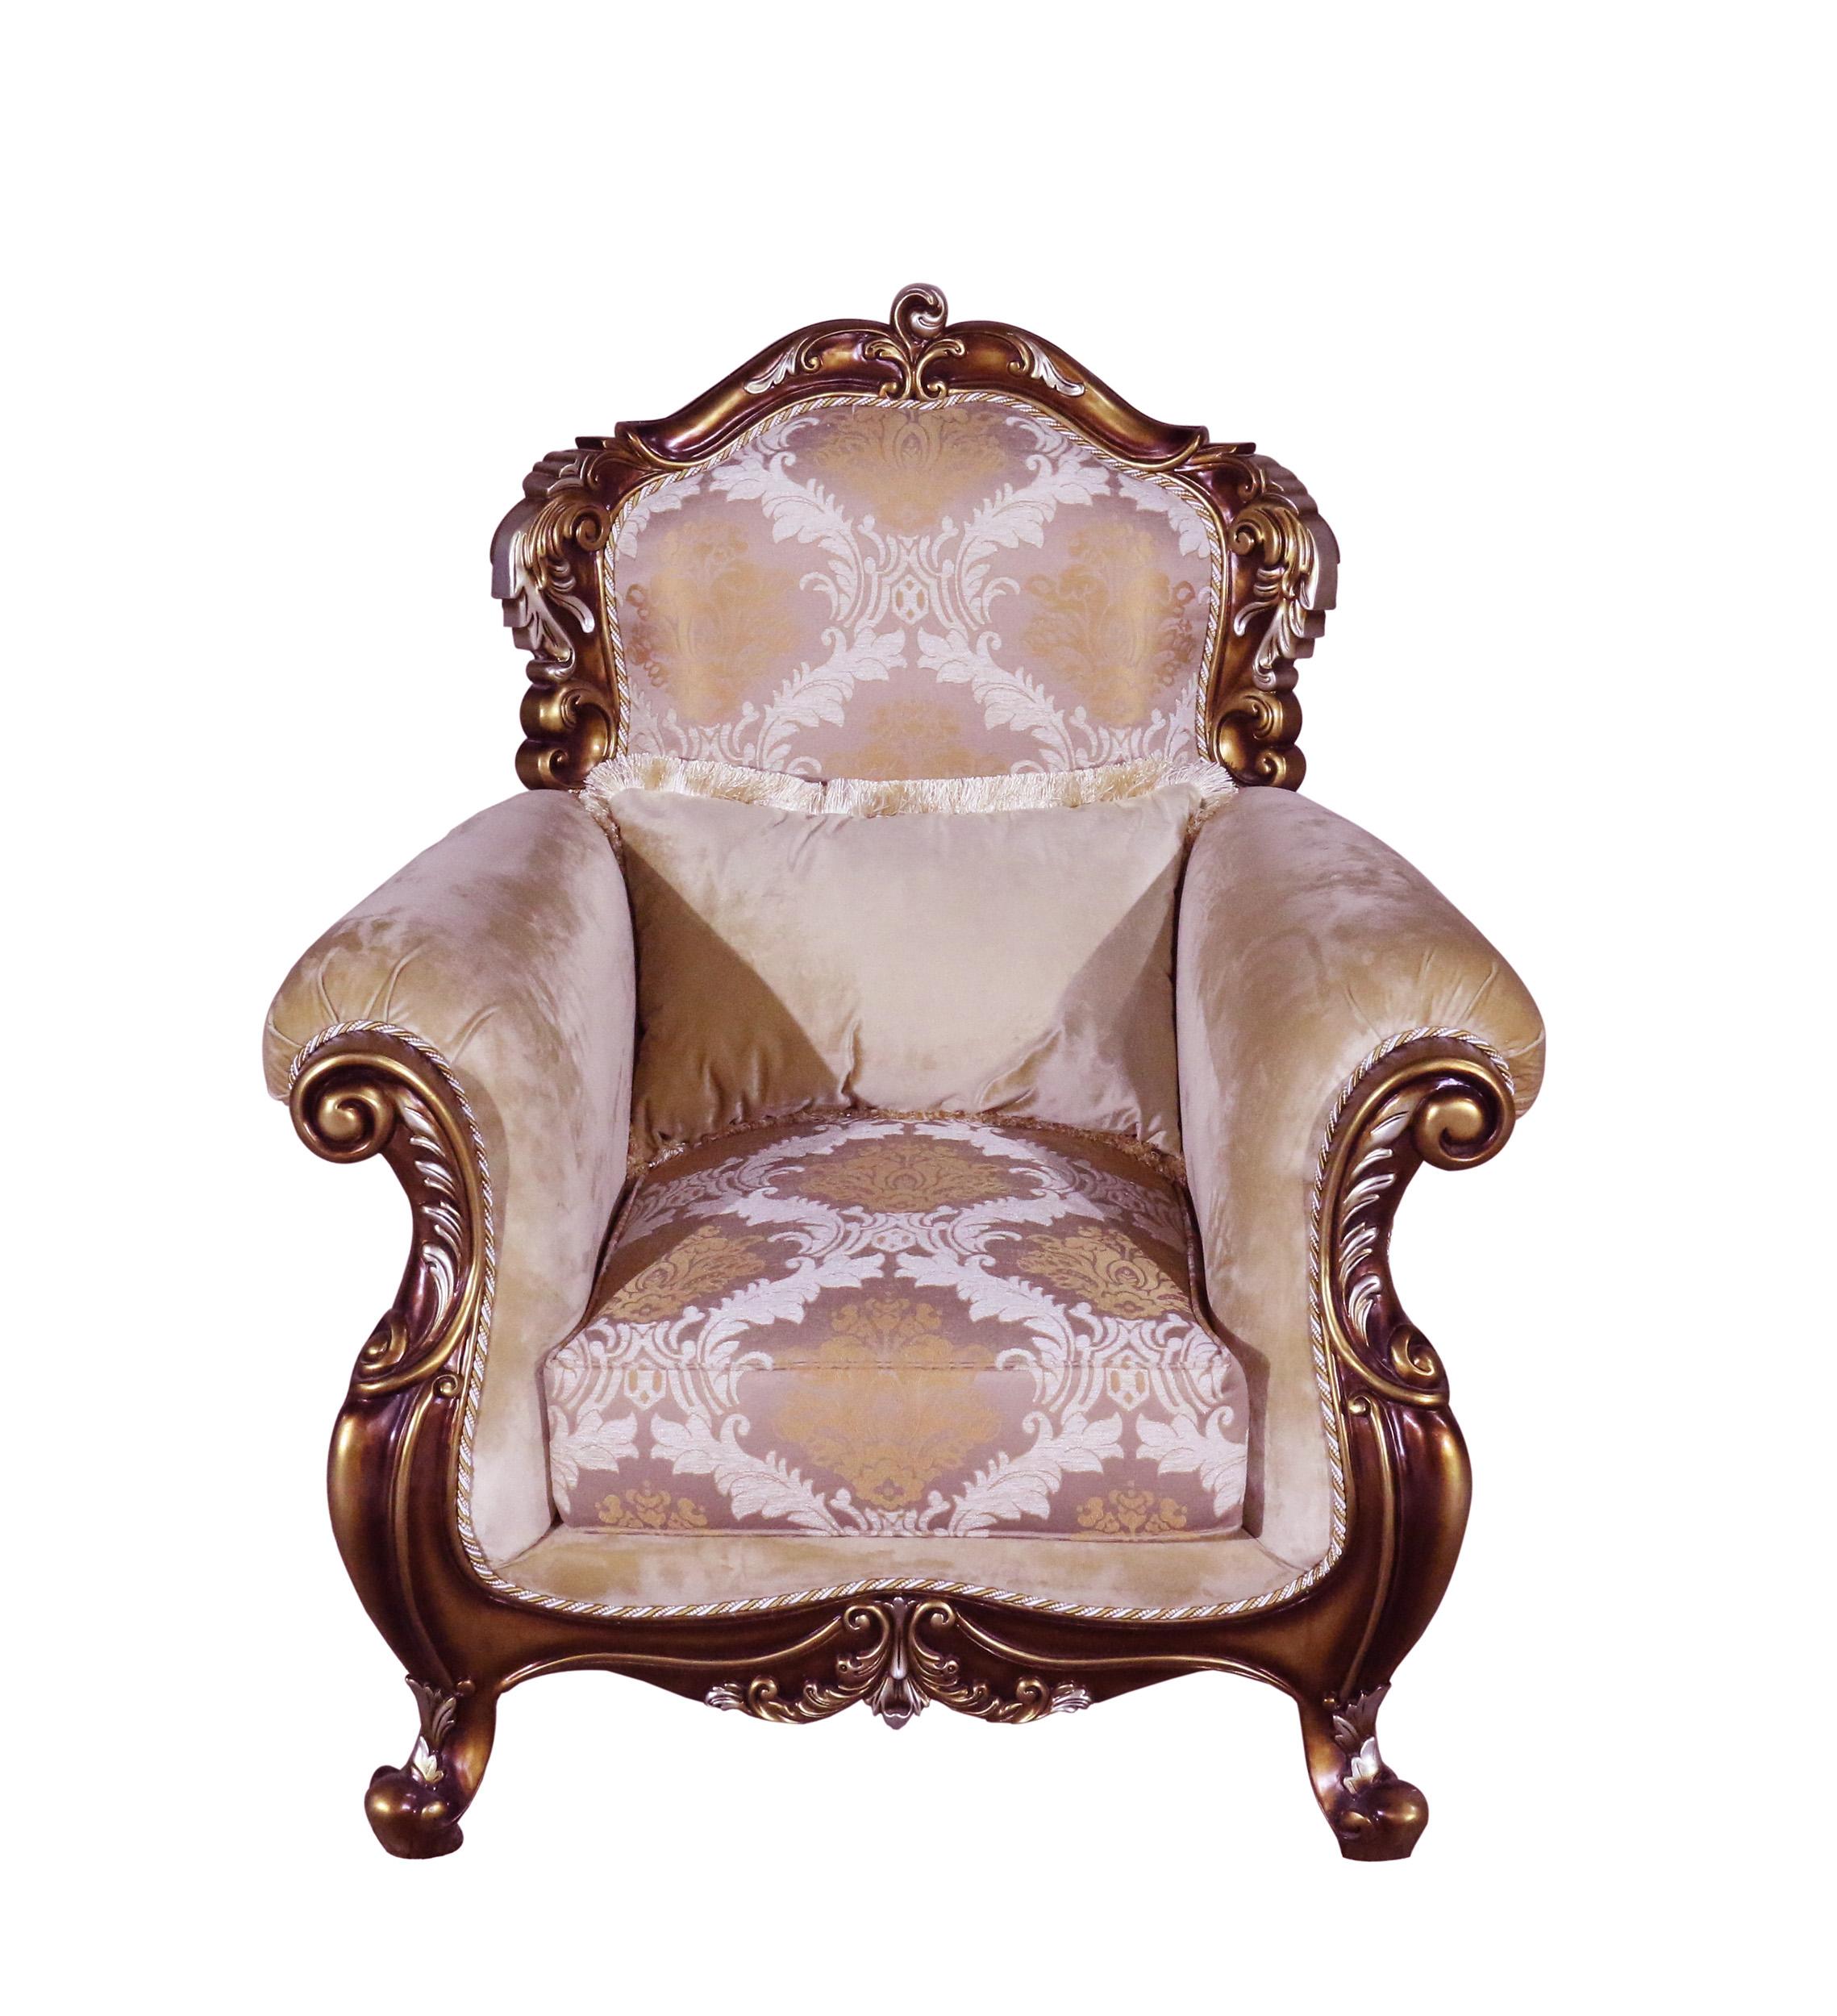 

    
Luxury Brown & Gold Wood Trim TIZIANO Chair EUROPEAN FURNITURE Traditional
